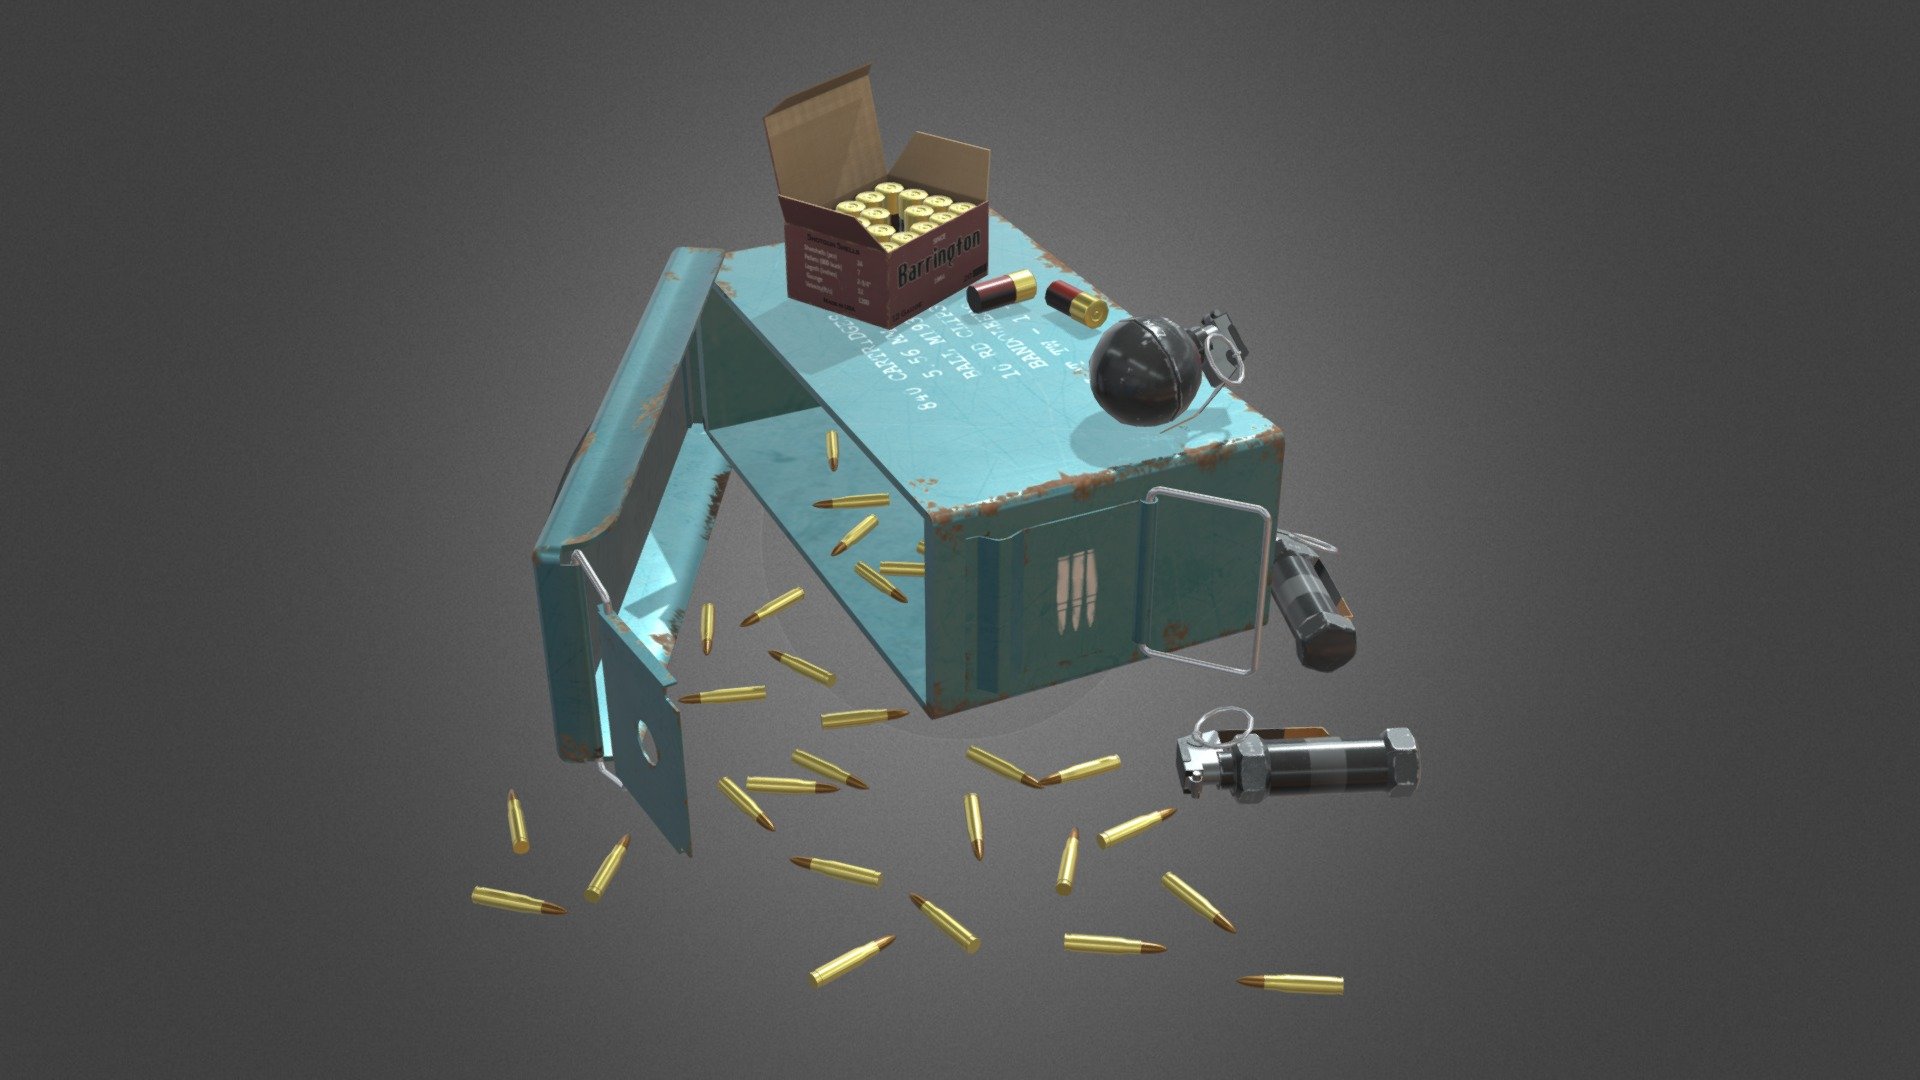 This is a little diarama I made which consists of an opened ammo crate spilling it's contents, a box of shotgun shells and some frag and stun grenades. Everything was made in Maya 2018. The textures were sourced from textures.com and then edited in Photoshop. The rust and edge ware was done by hand 3d model